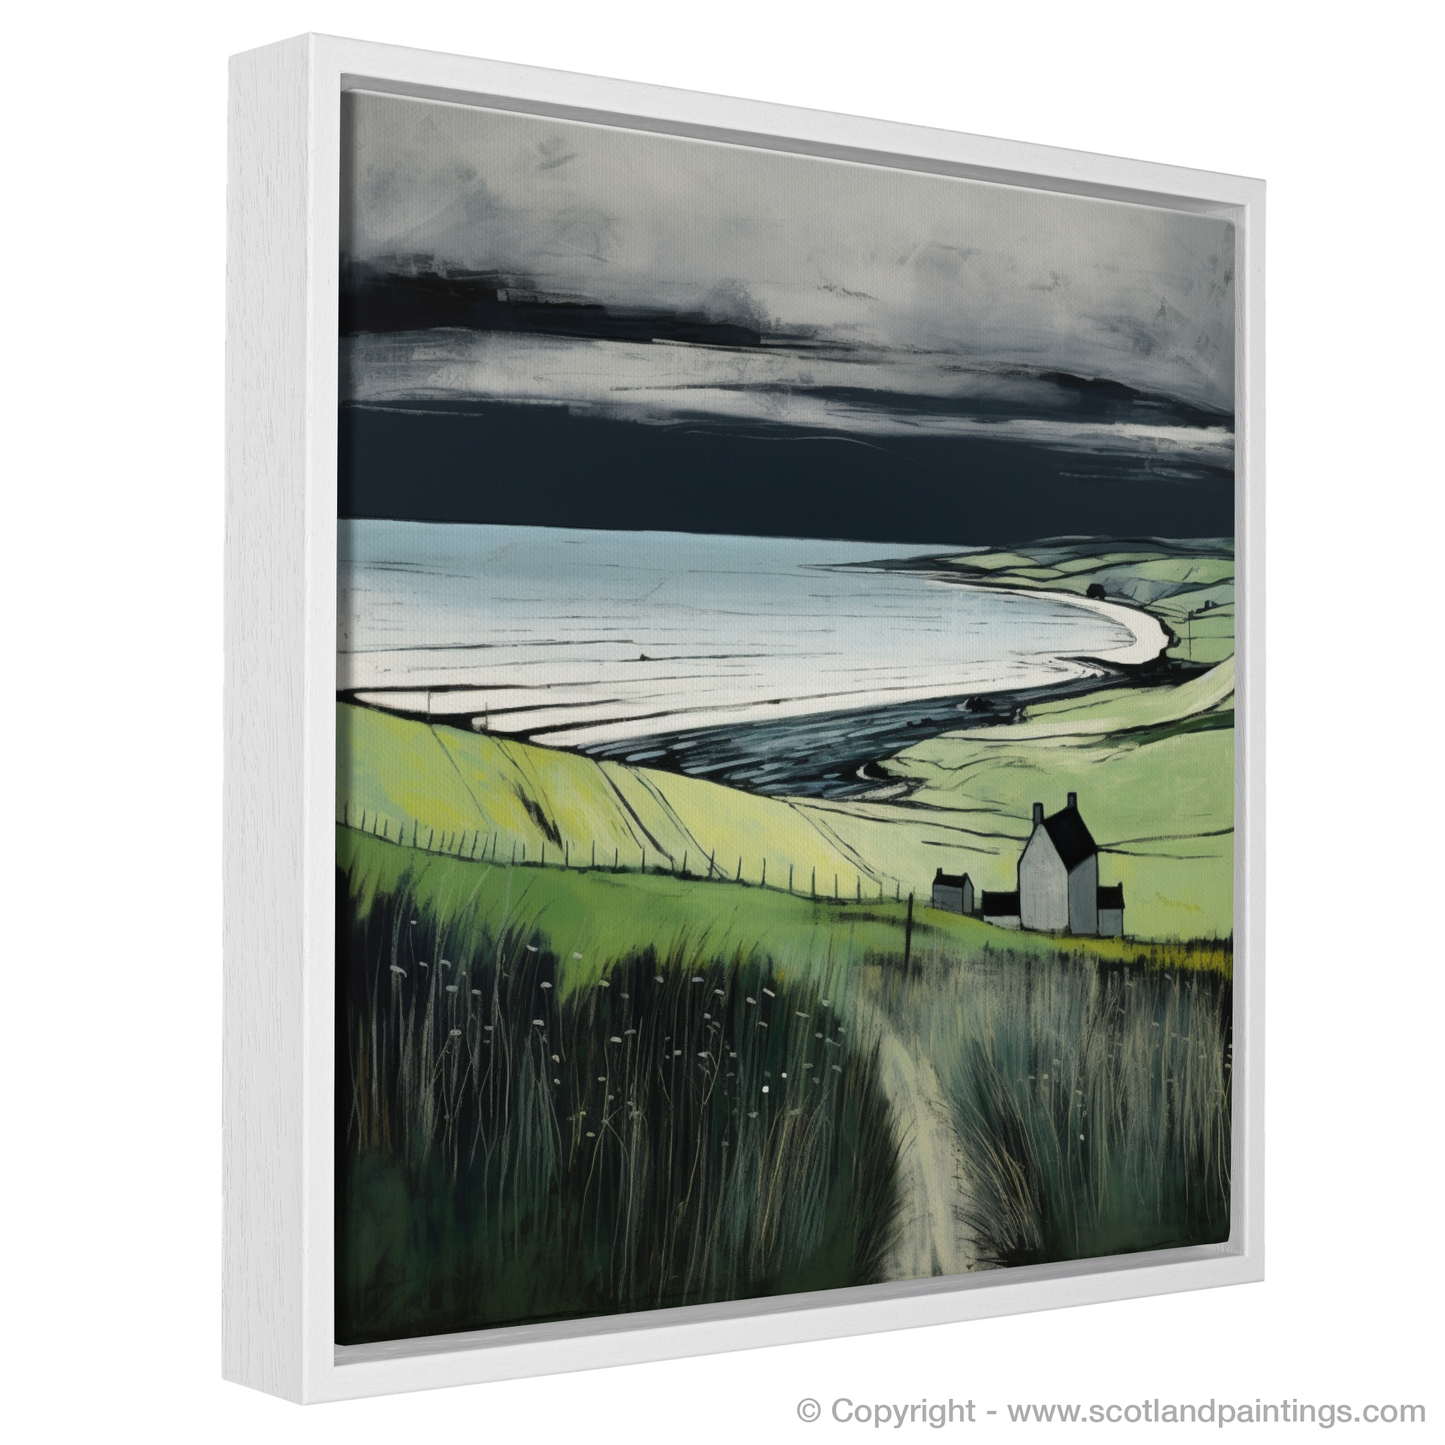 Painting and Art Print of Lunan Bay, Angus entitled "Lunan Bay Reverie: An Illustrative Expressionist Journey".